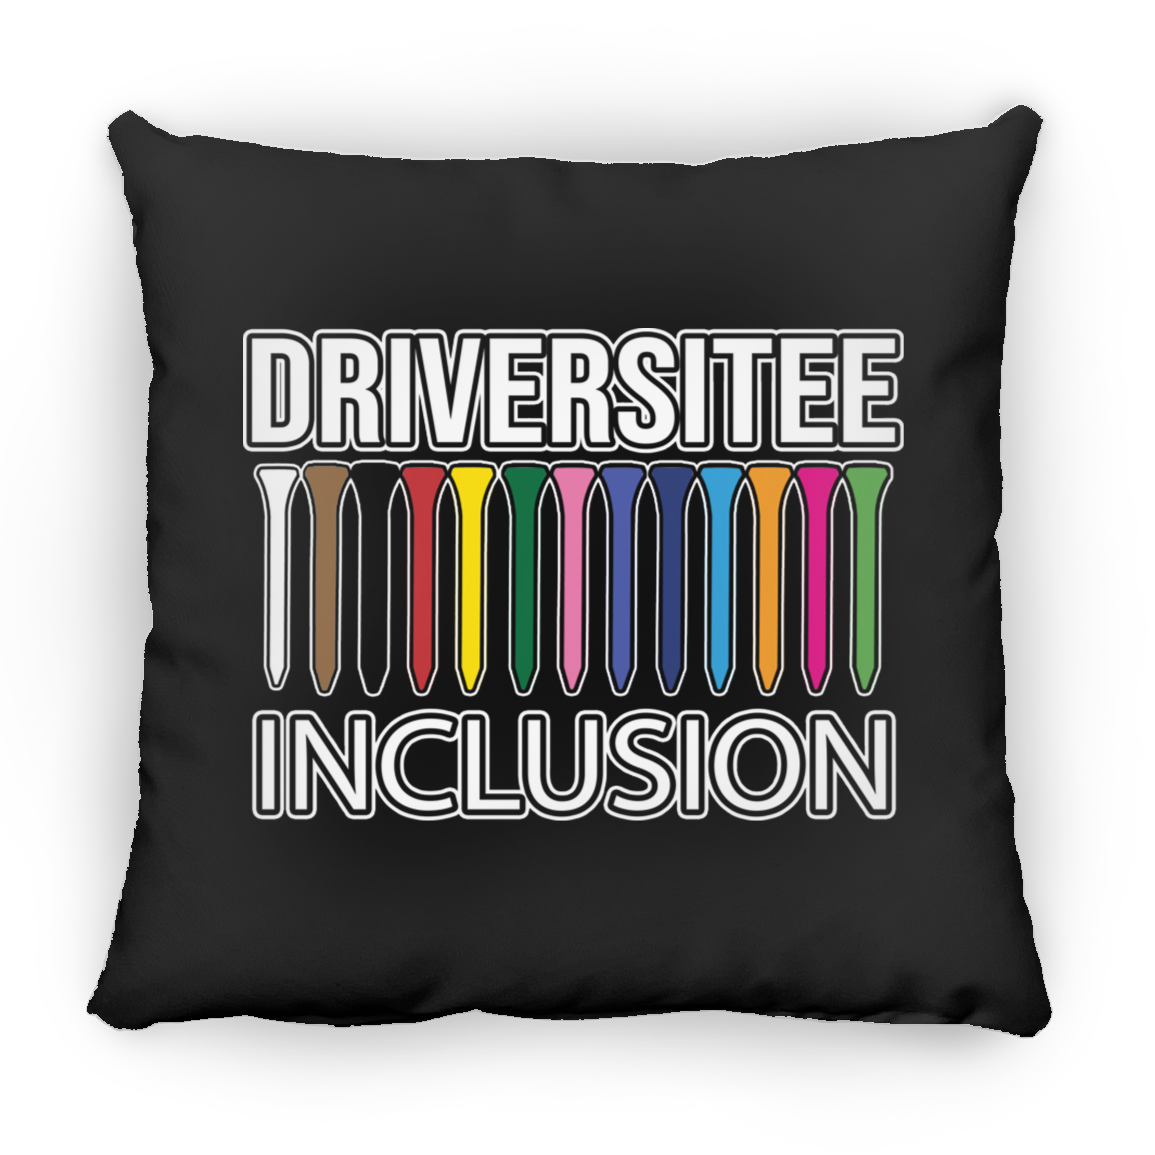 ZZZ#06 OPG Custom Design. DRIVER-SITEE & INCLUSION. Large Square Pillow